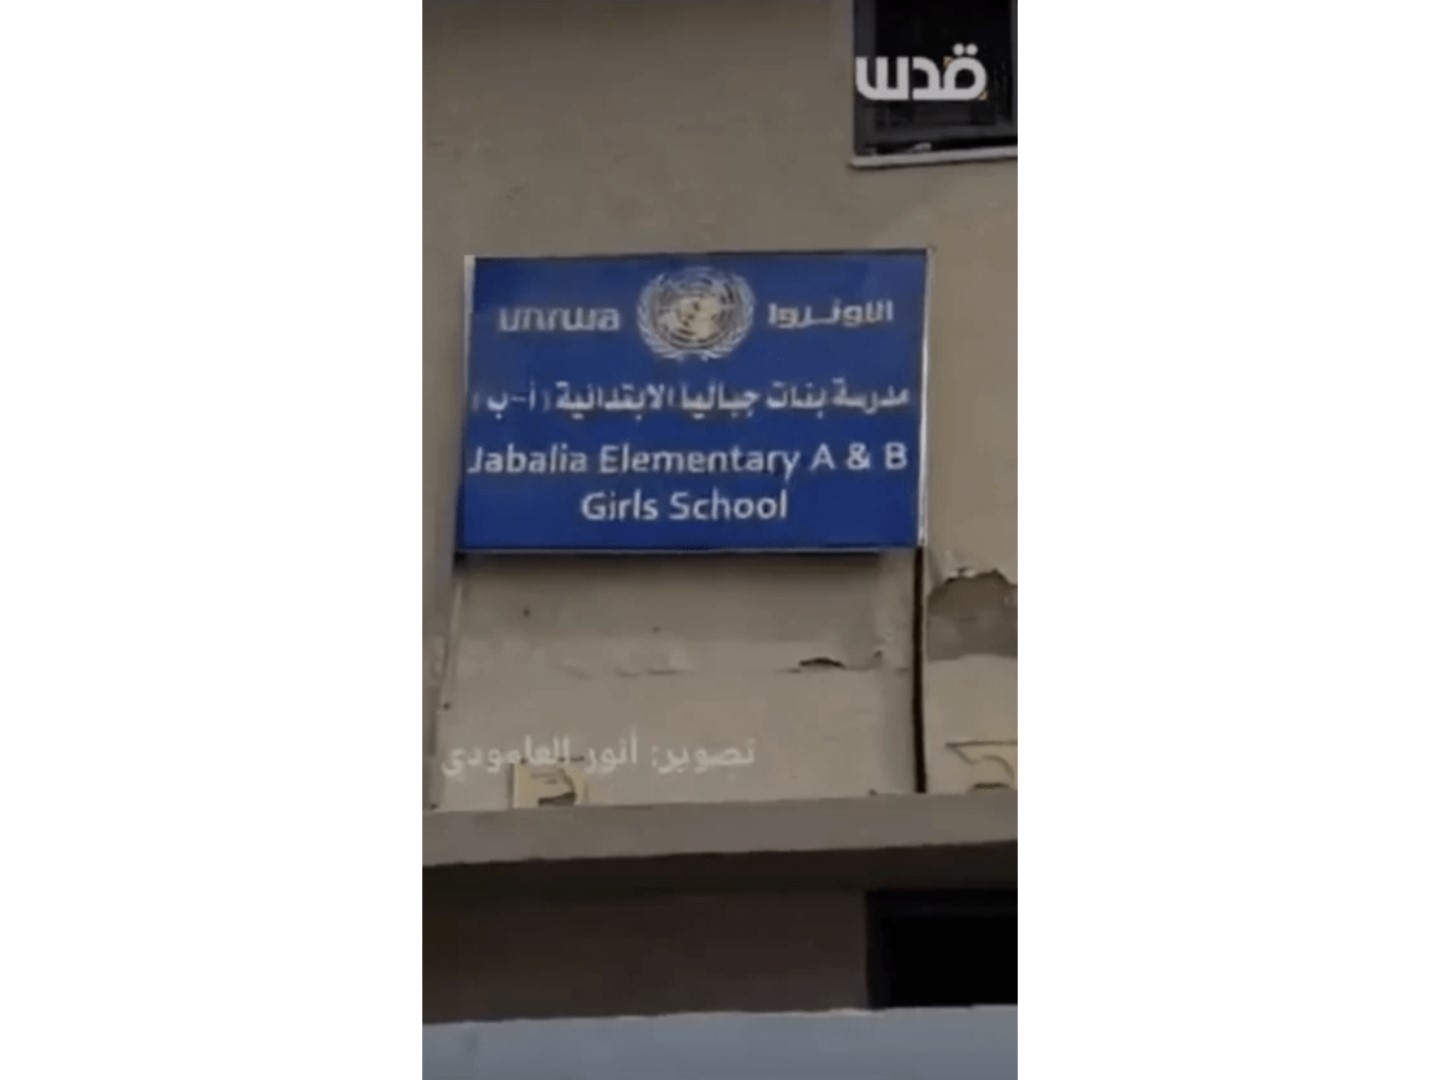 A still from a video showing a building sign that reads: "UNRWA Jabalia Elementary A & B Girls School"